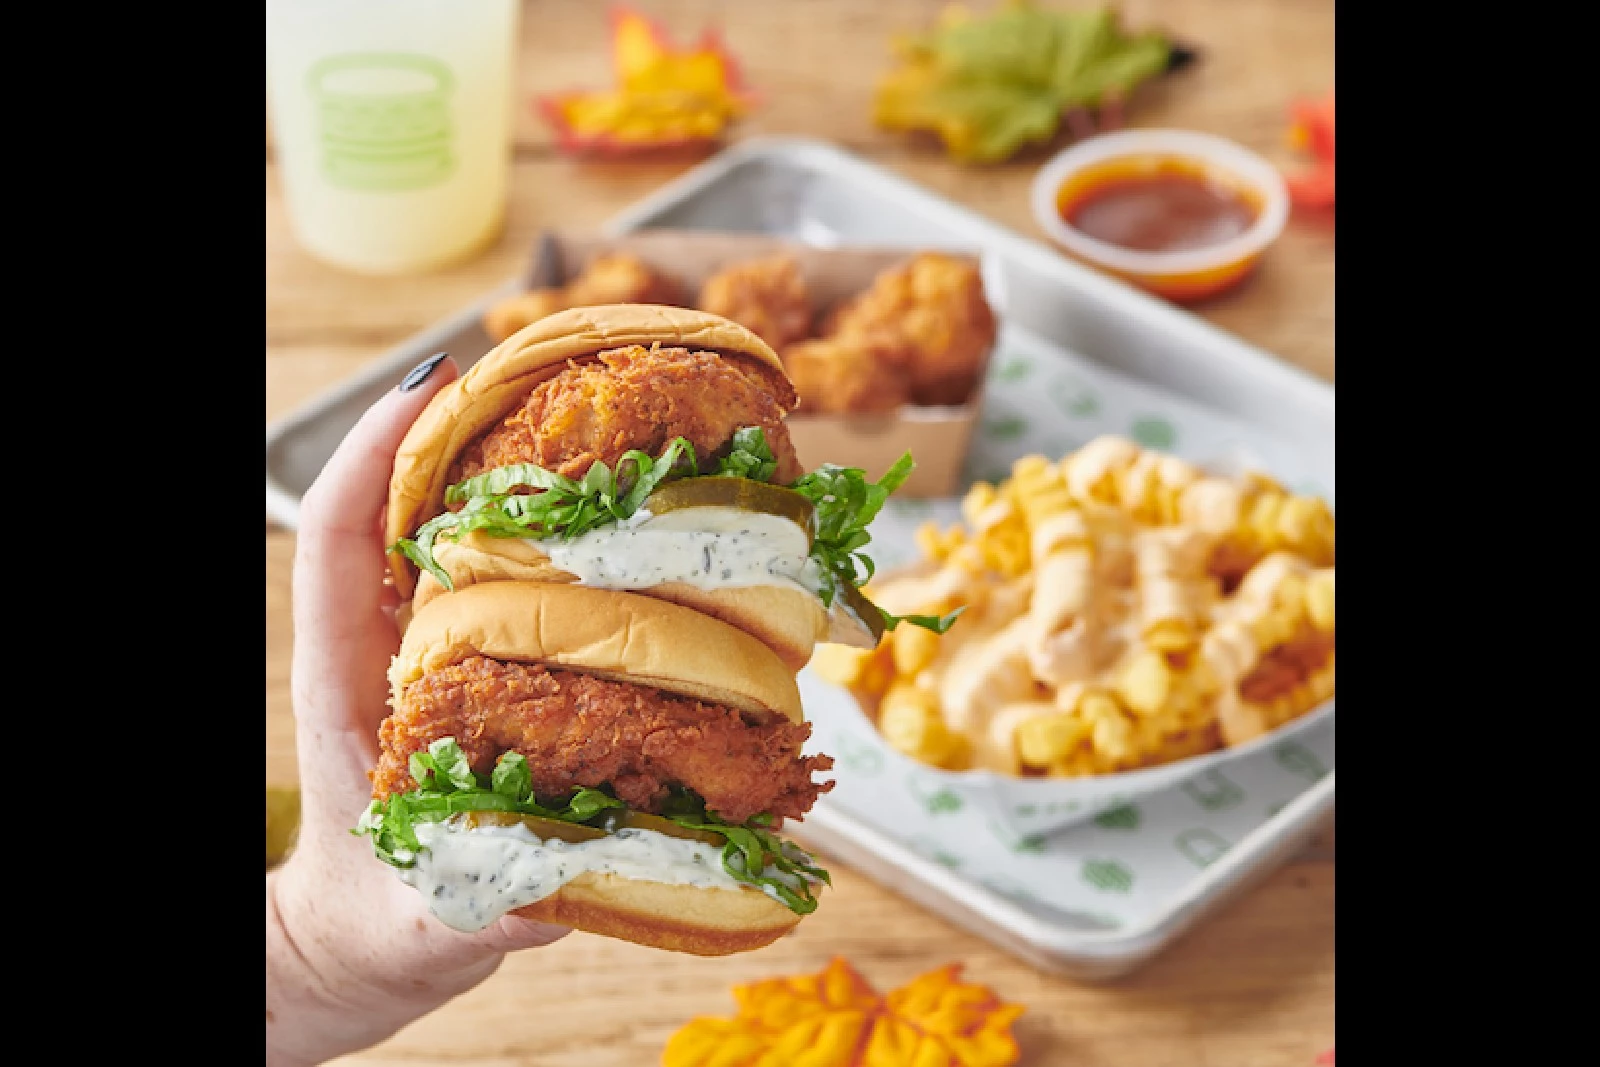 Richmond area's first Shake Shack delays opening to Monday